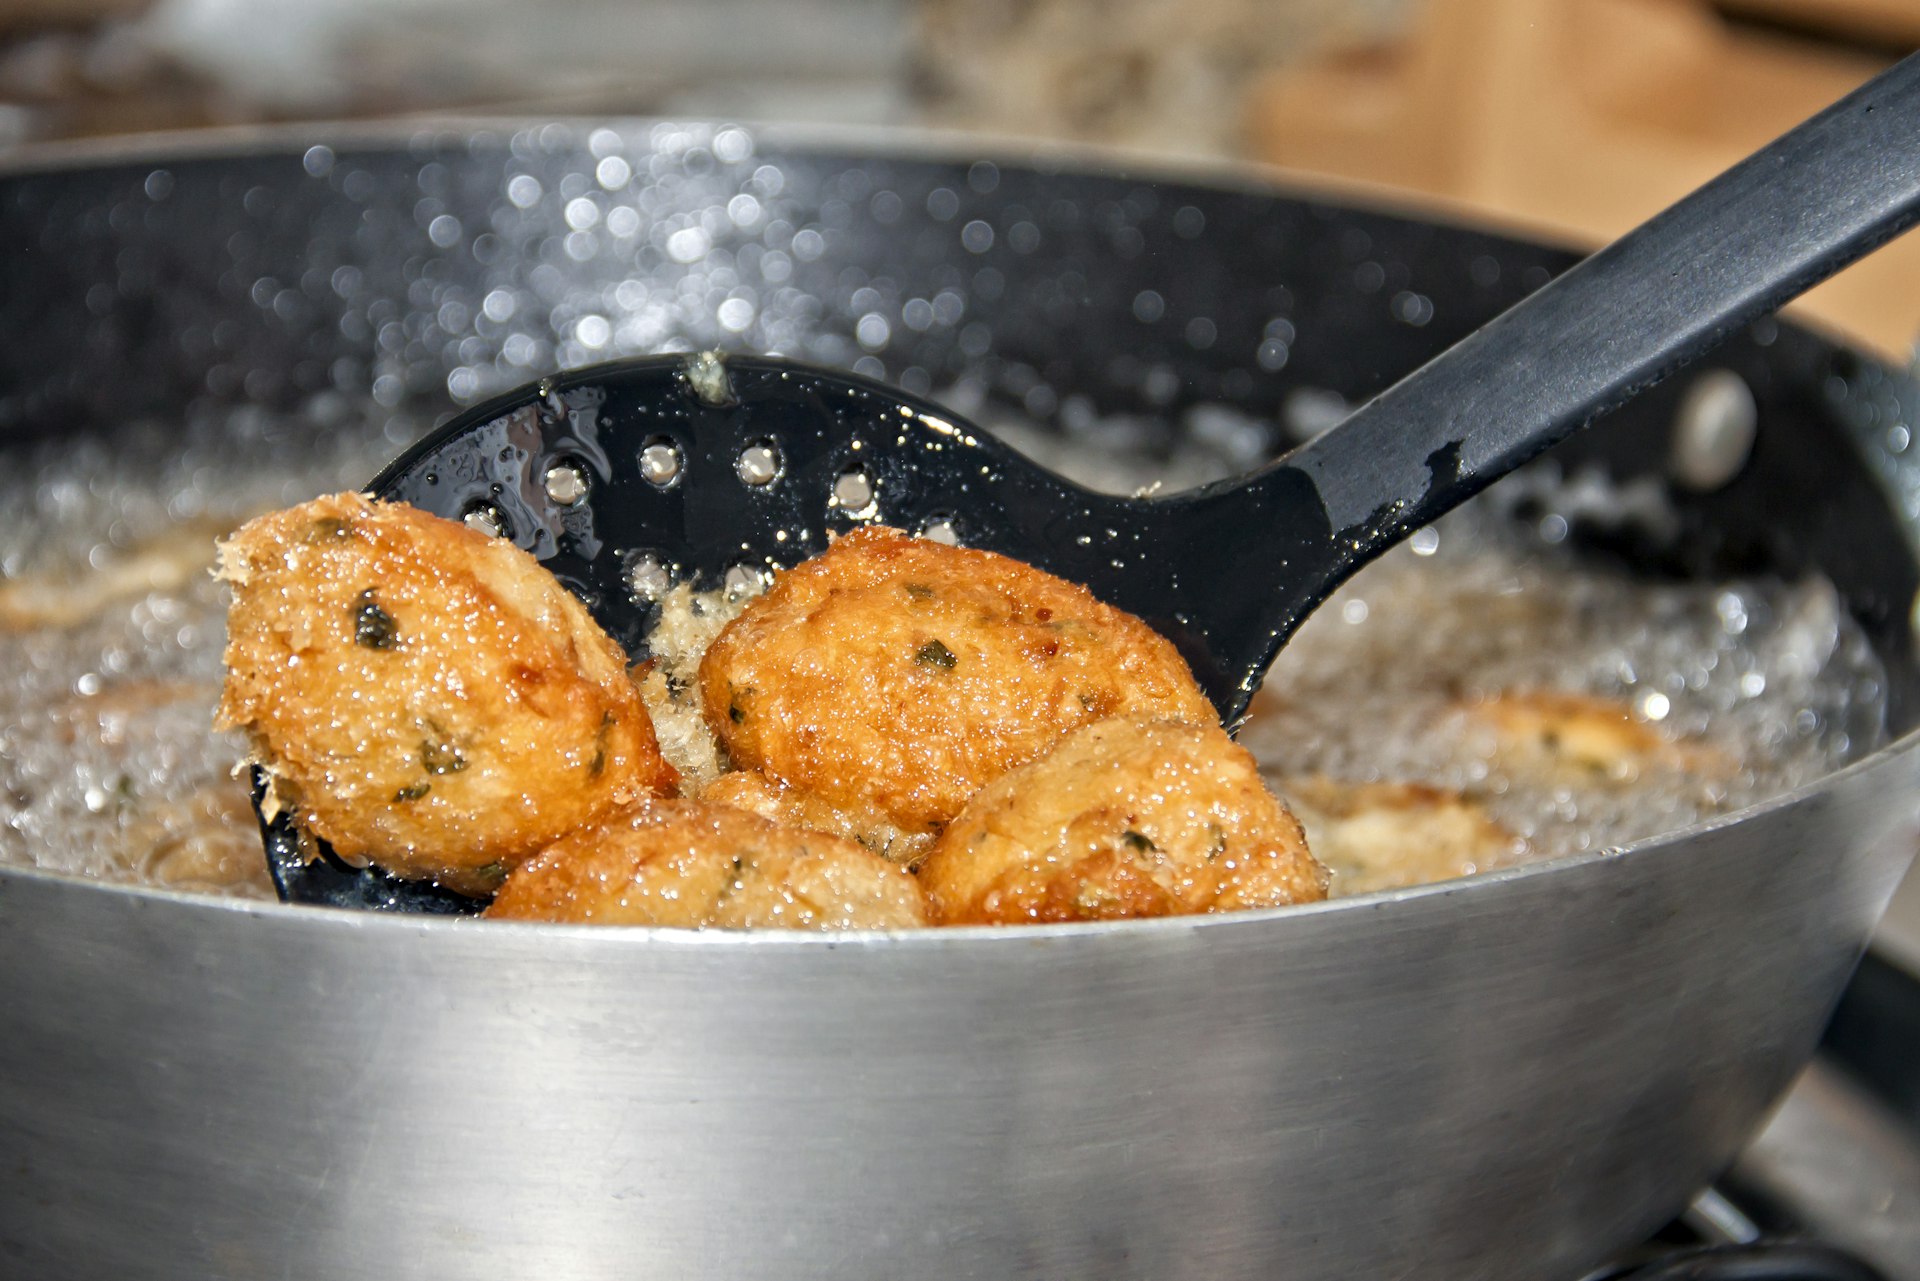 Three codfish balls, known as Bolinho de Bacalhau in Brazil, are fried in a black frying pan with plenty of hot oil in São Paulo.